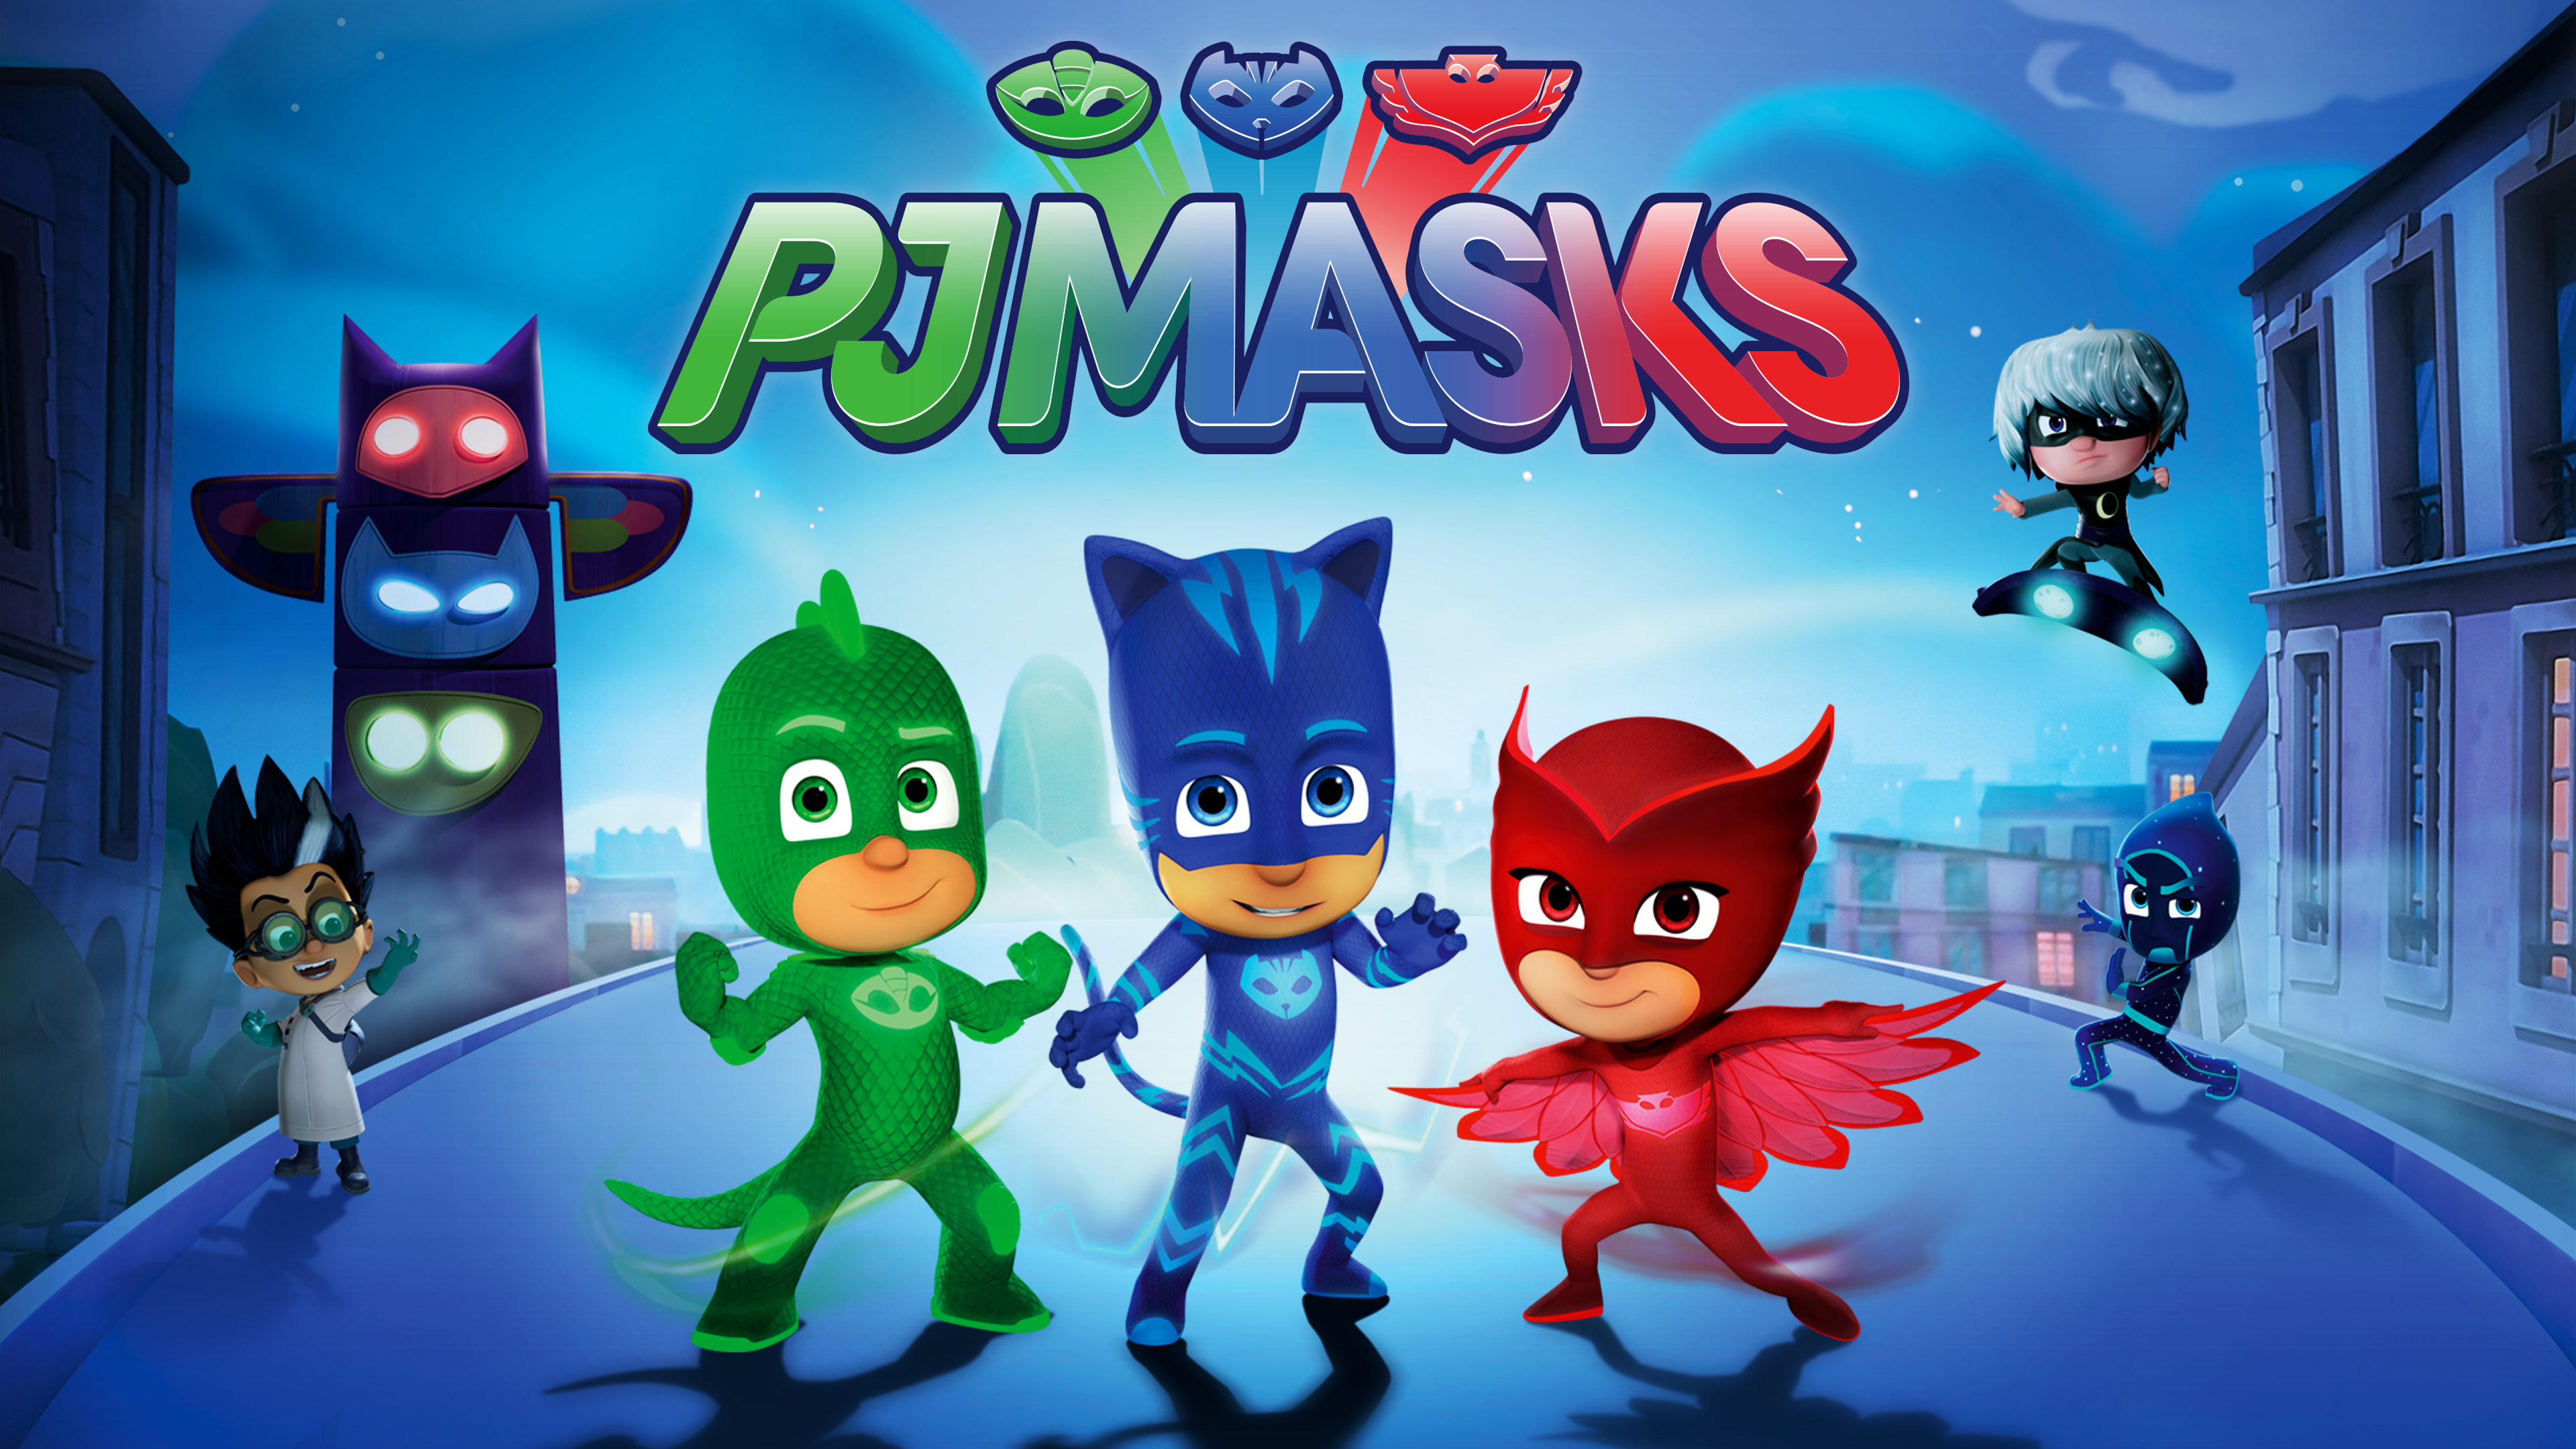 PJ Masks Season Four Springs into Action This May with Special Extended Episode: "Heroes of the Sky"